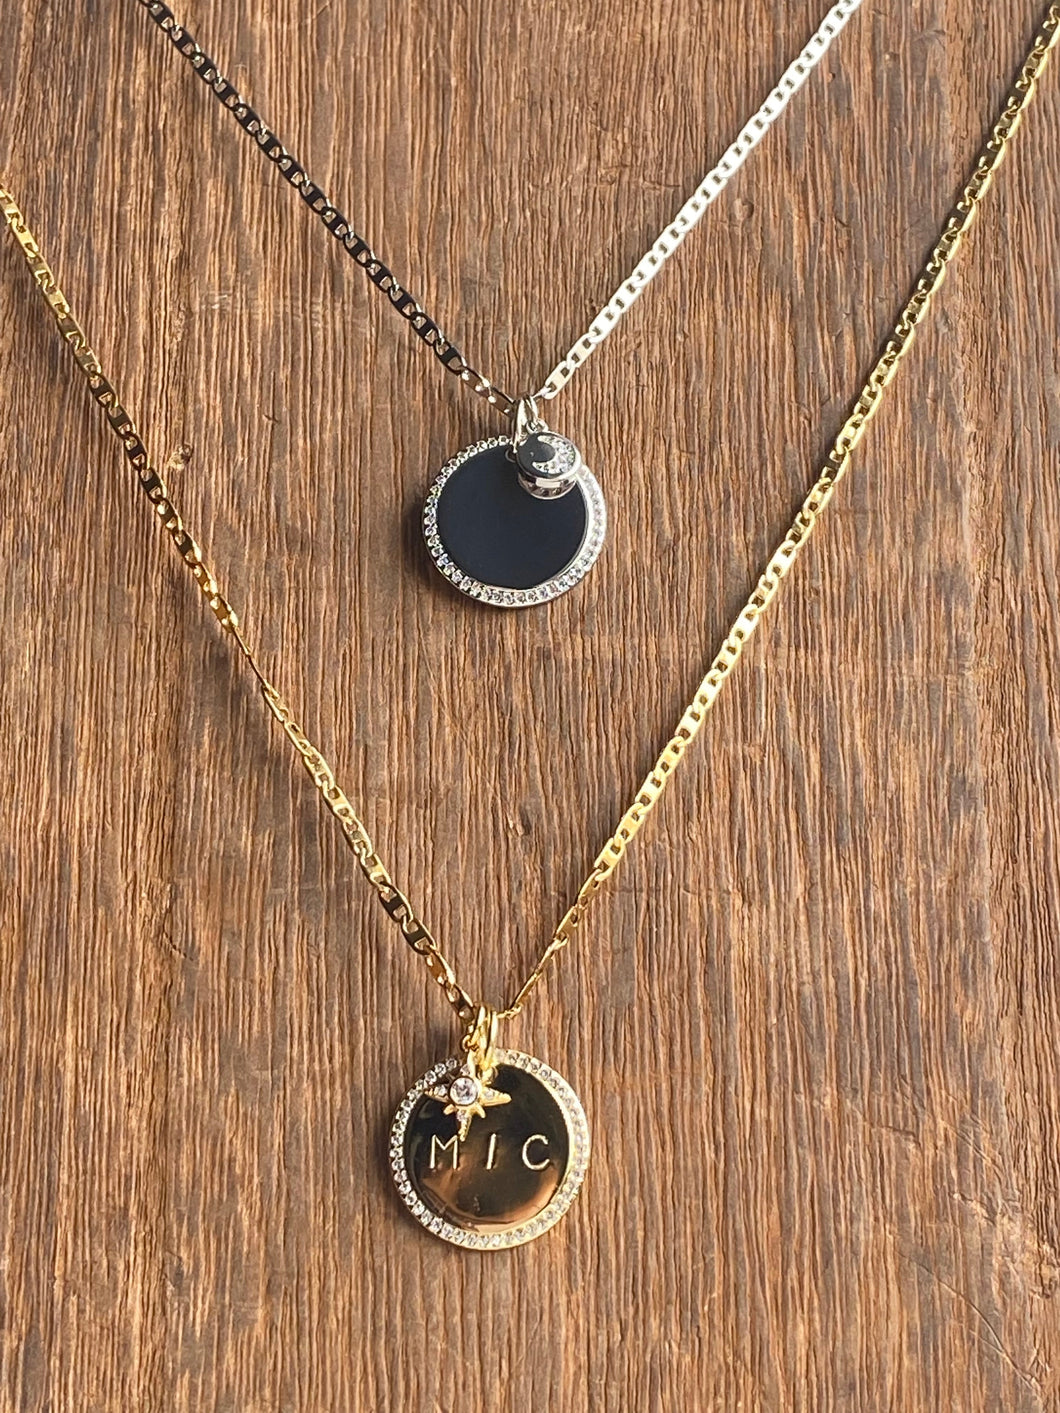 Eclipse (pendant only)